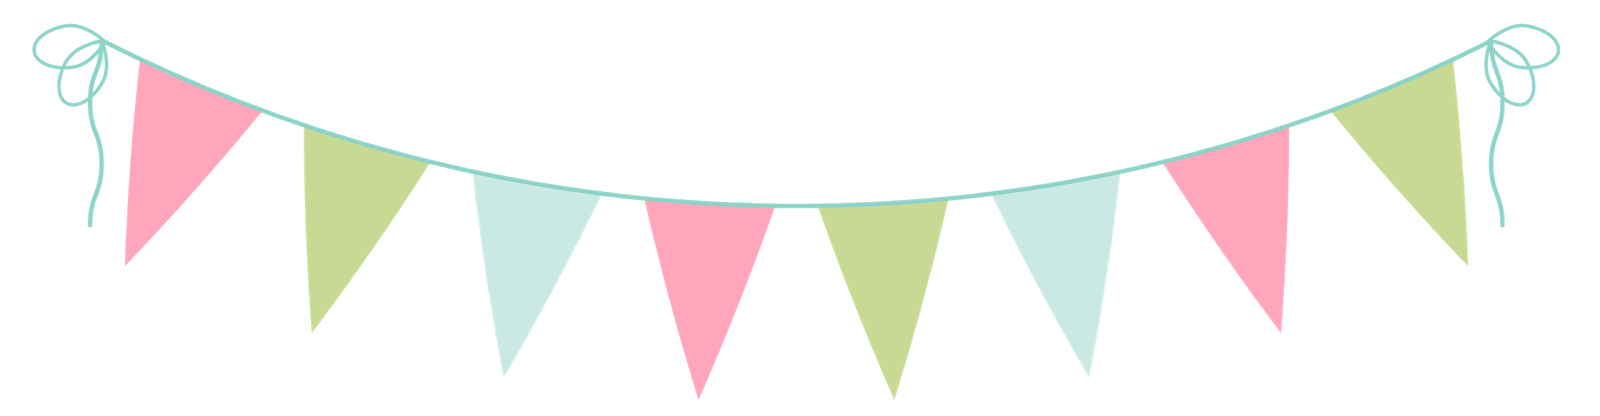 free clipart images bunting - photo #50